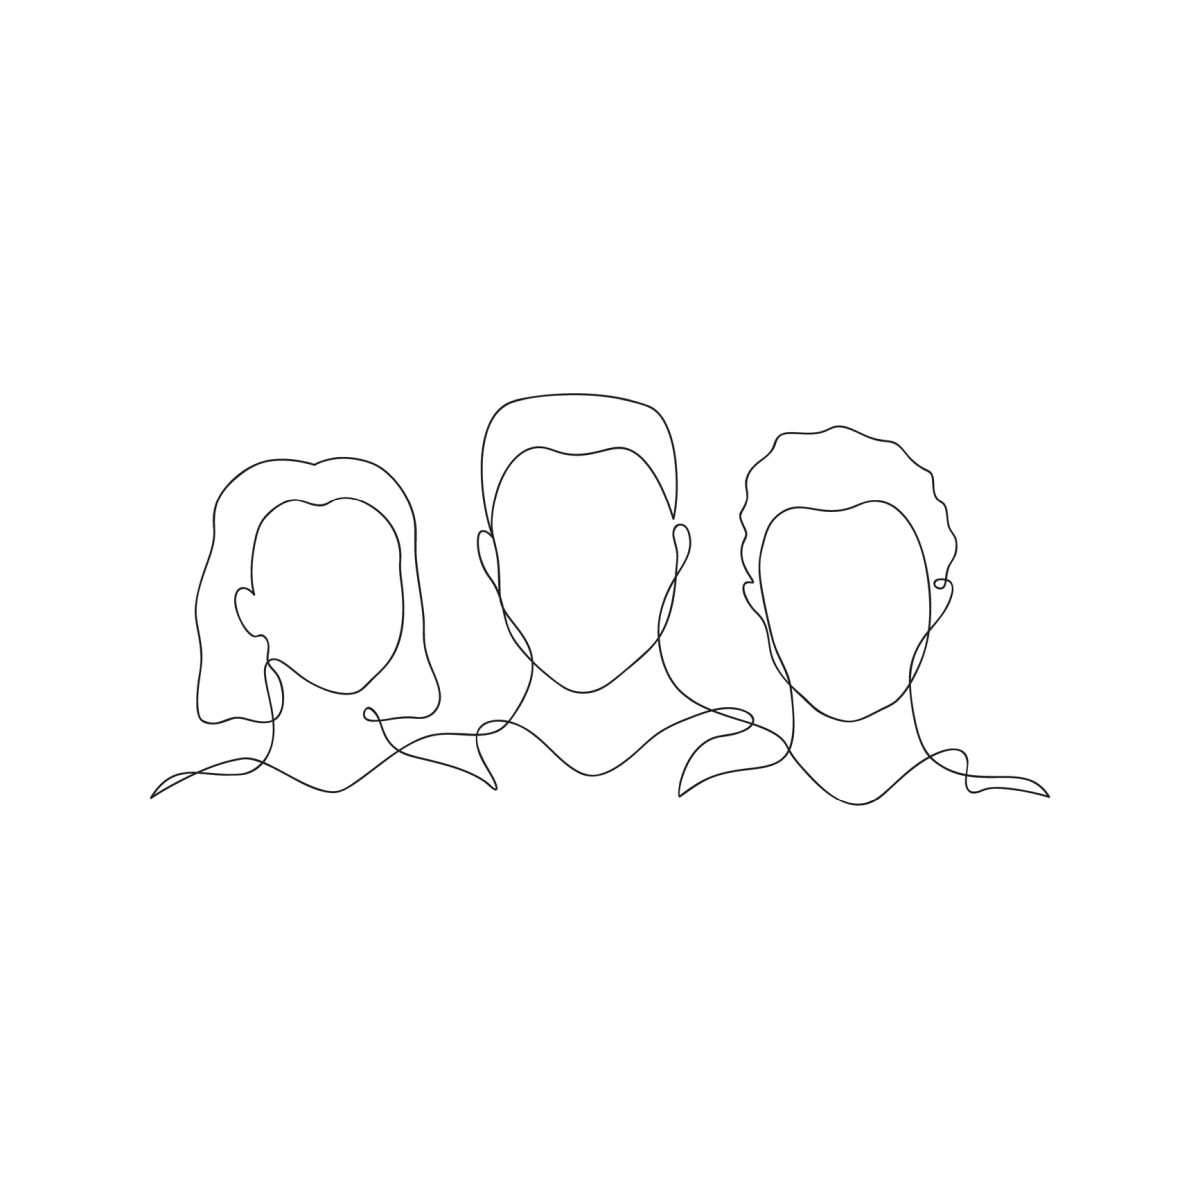 Drawing Facial Features | Pluralsight